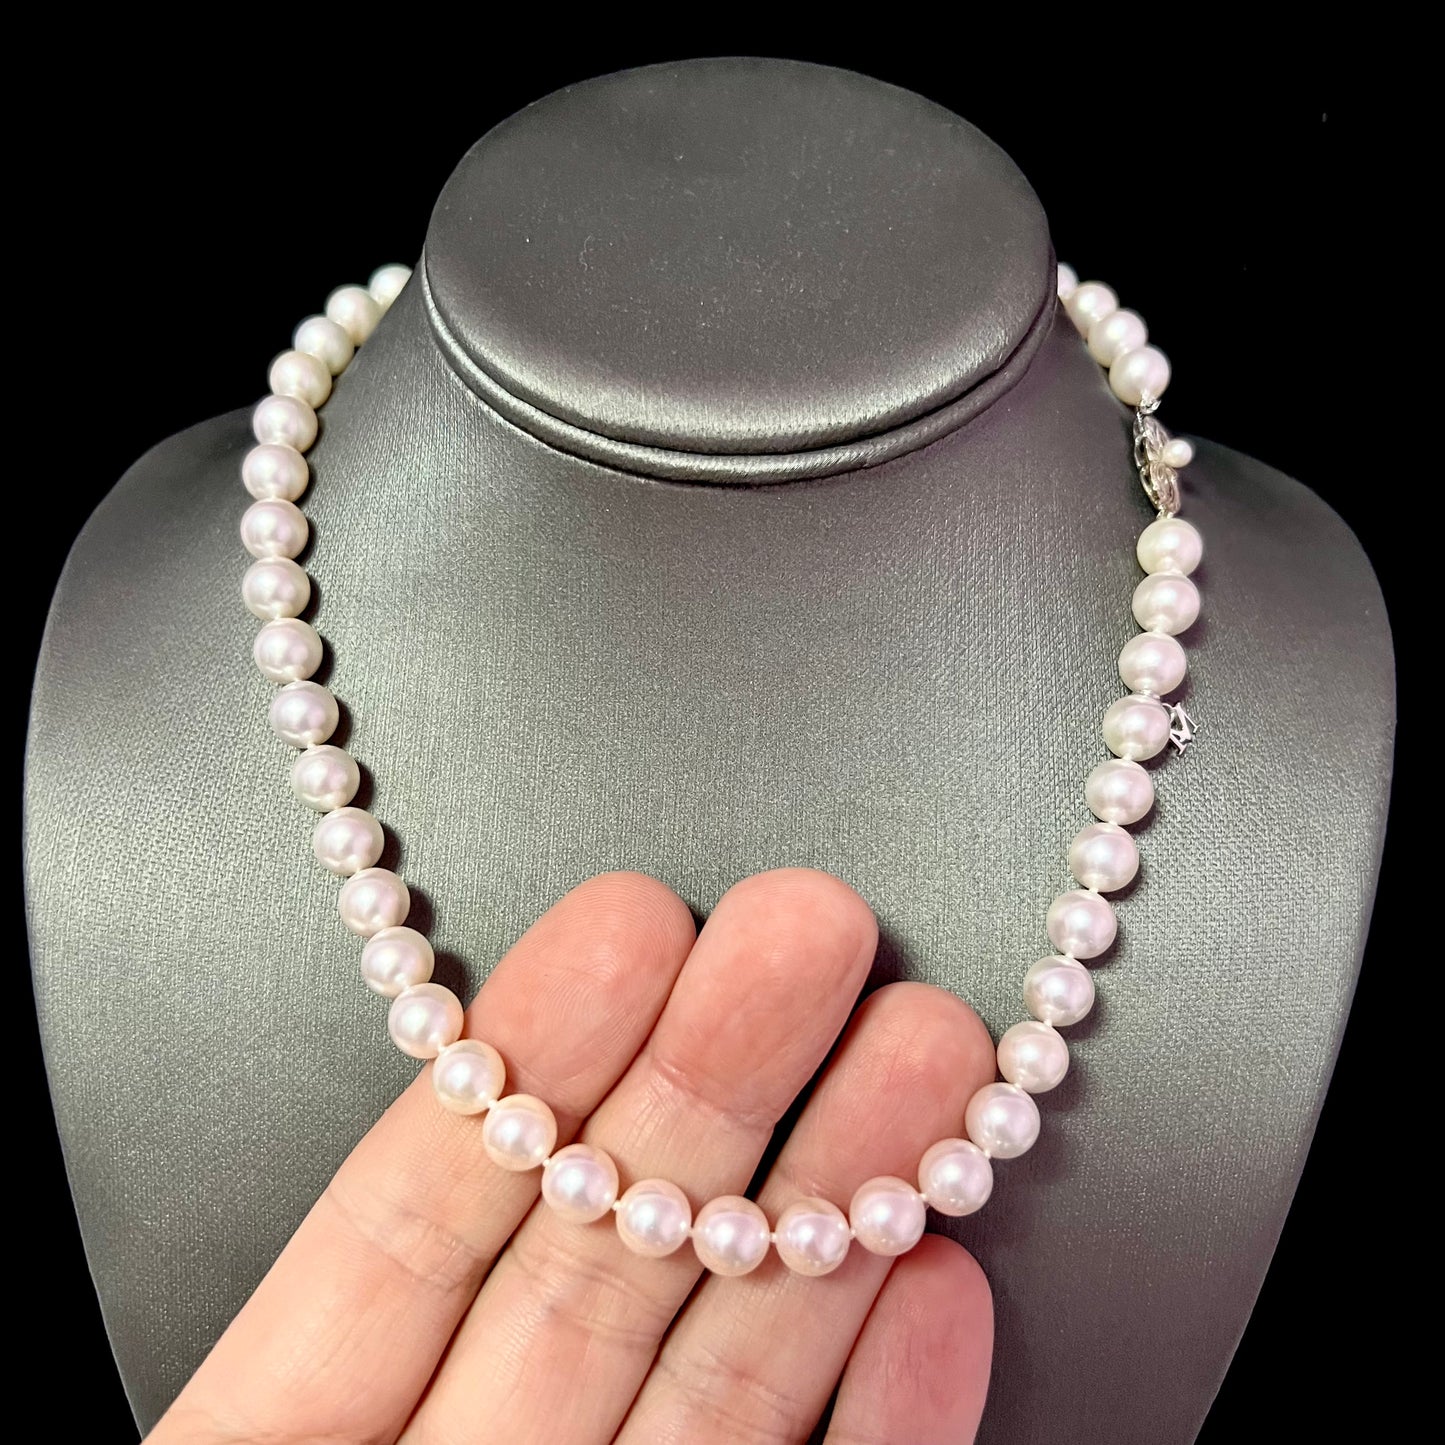 Mikimoto Estate Akoya Pearl Necklace 17.5" 18k W Gold 8.5 mm Certified $9,750 216996